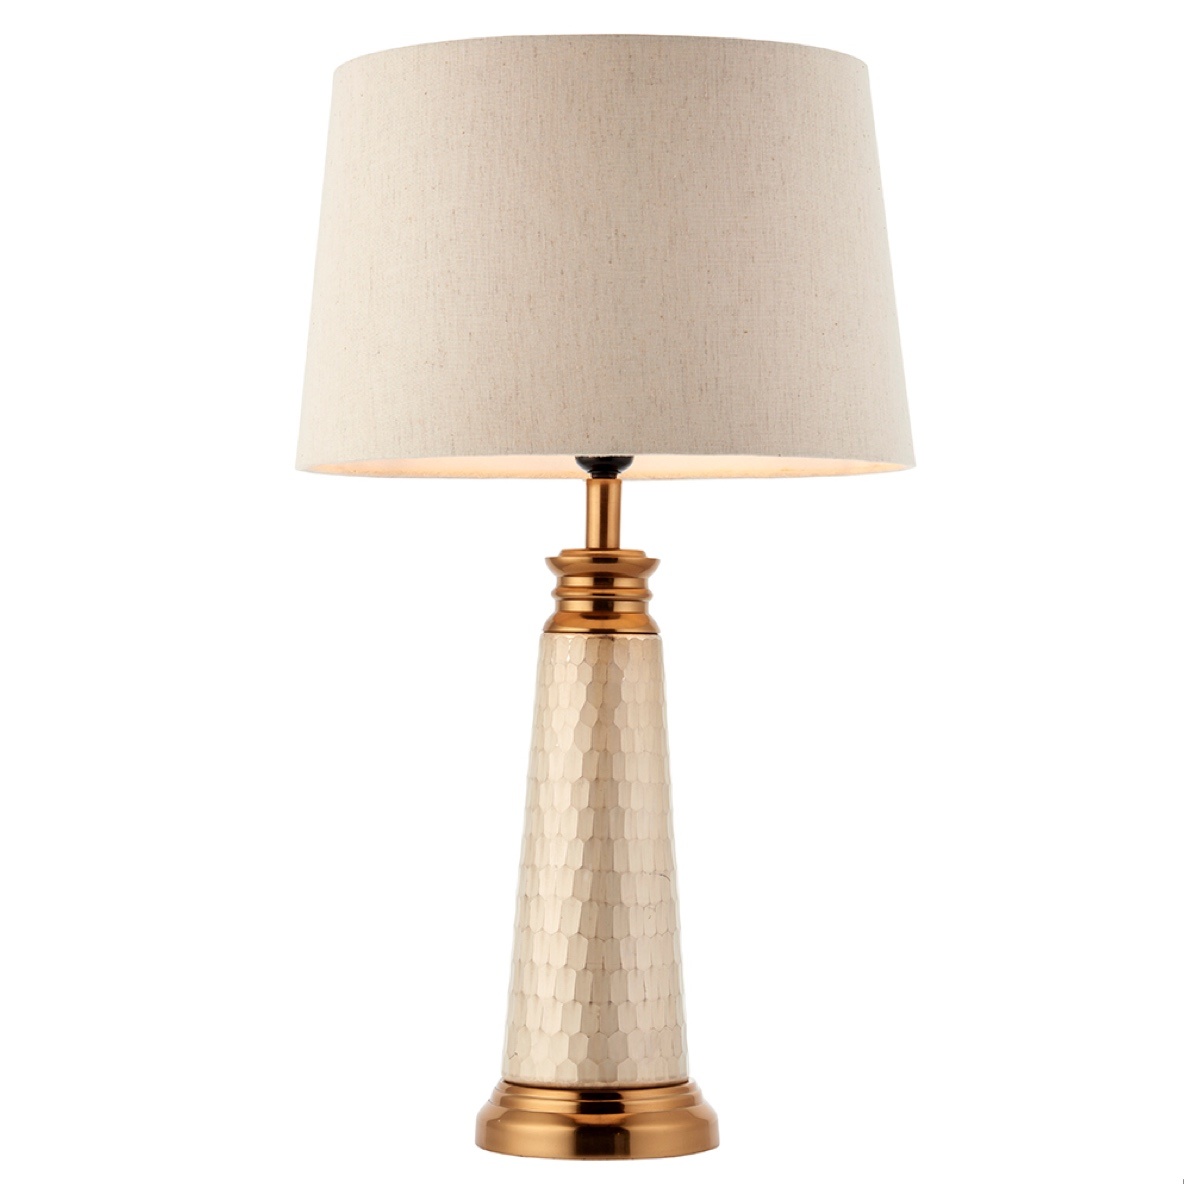 Pearl Effect Glass Table Lamp Lightbox, Vintage White Table Lamps